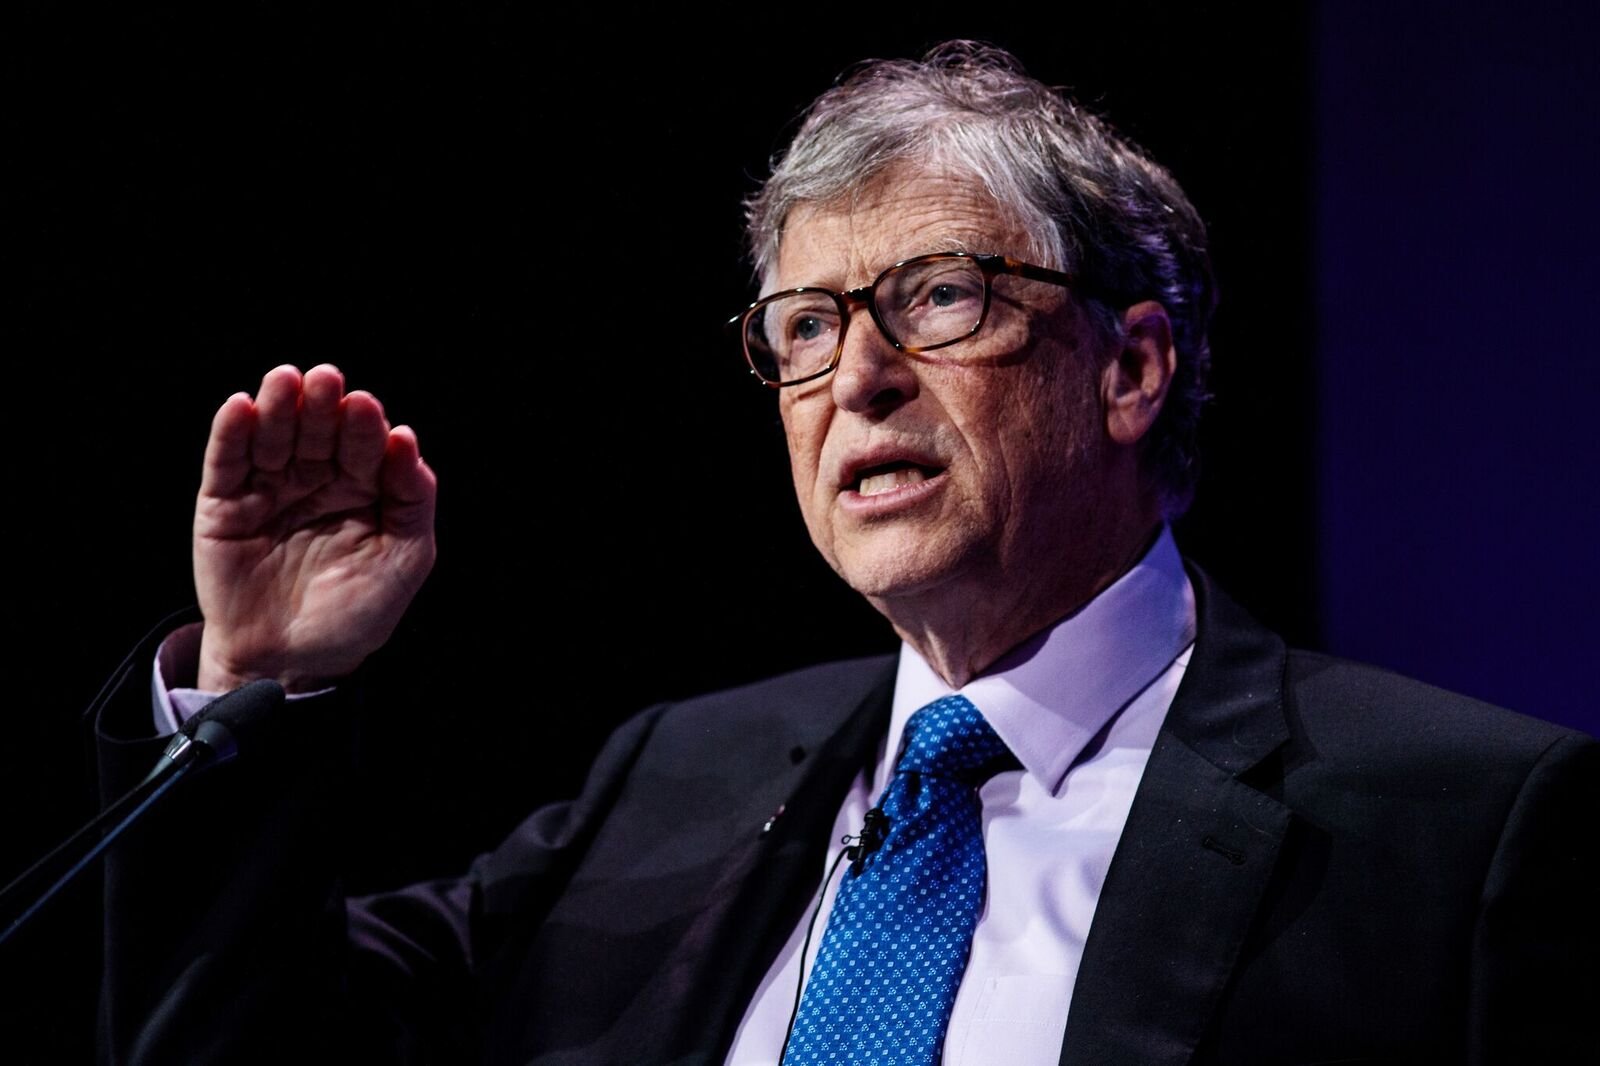 Bill Gates makes a speech at the Malaria Summit at 8 Northumberland Avenue on April 18, 2018 | Photo: Getty Images